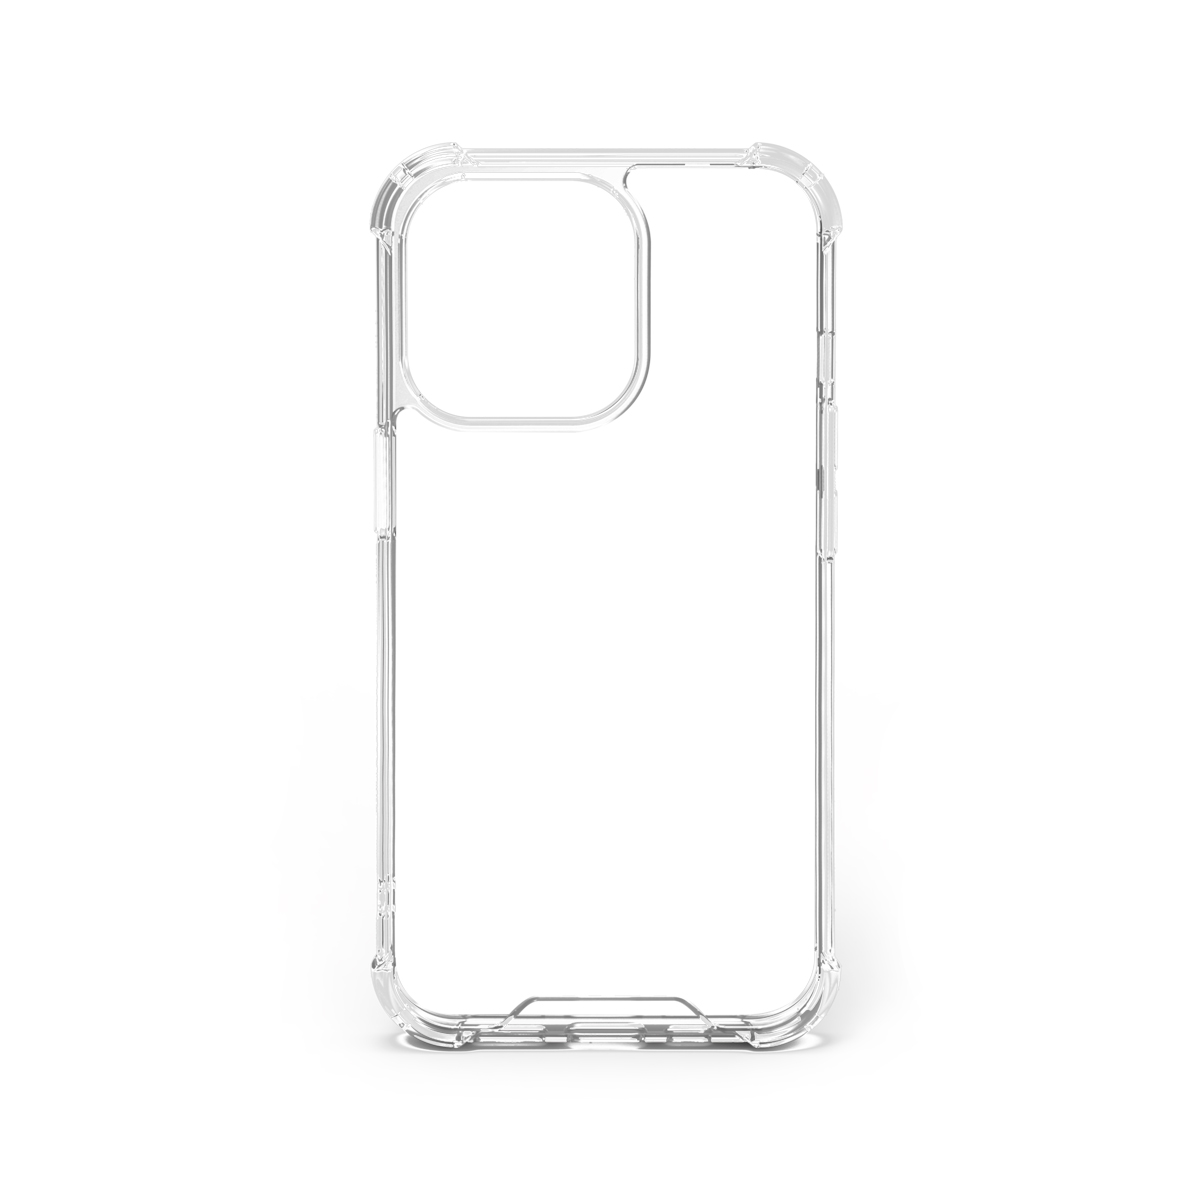 inno3C iPhone 13 Series Protective Case | inno3C | Empowered By Innovation